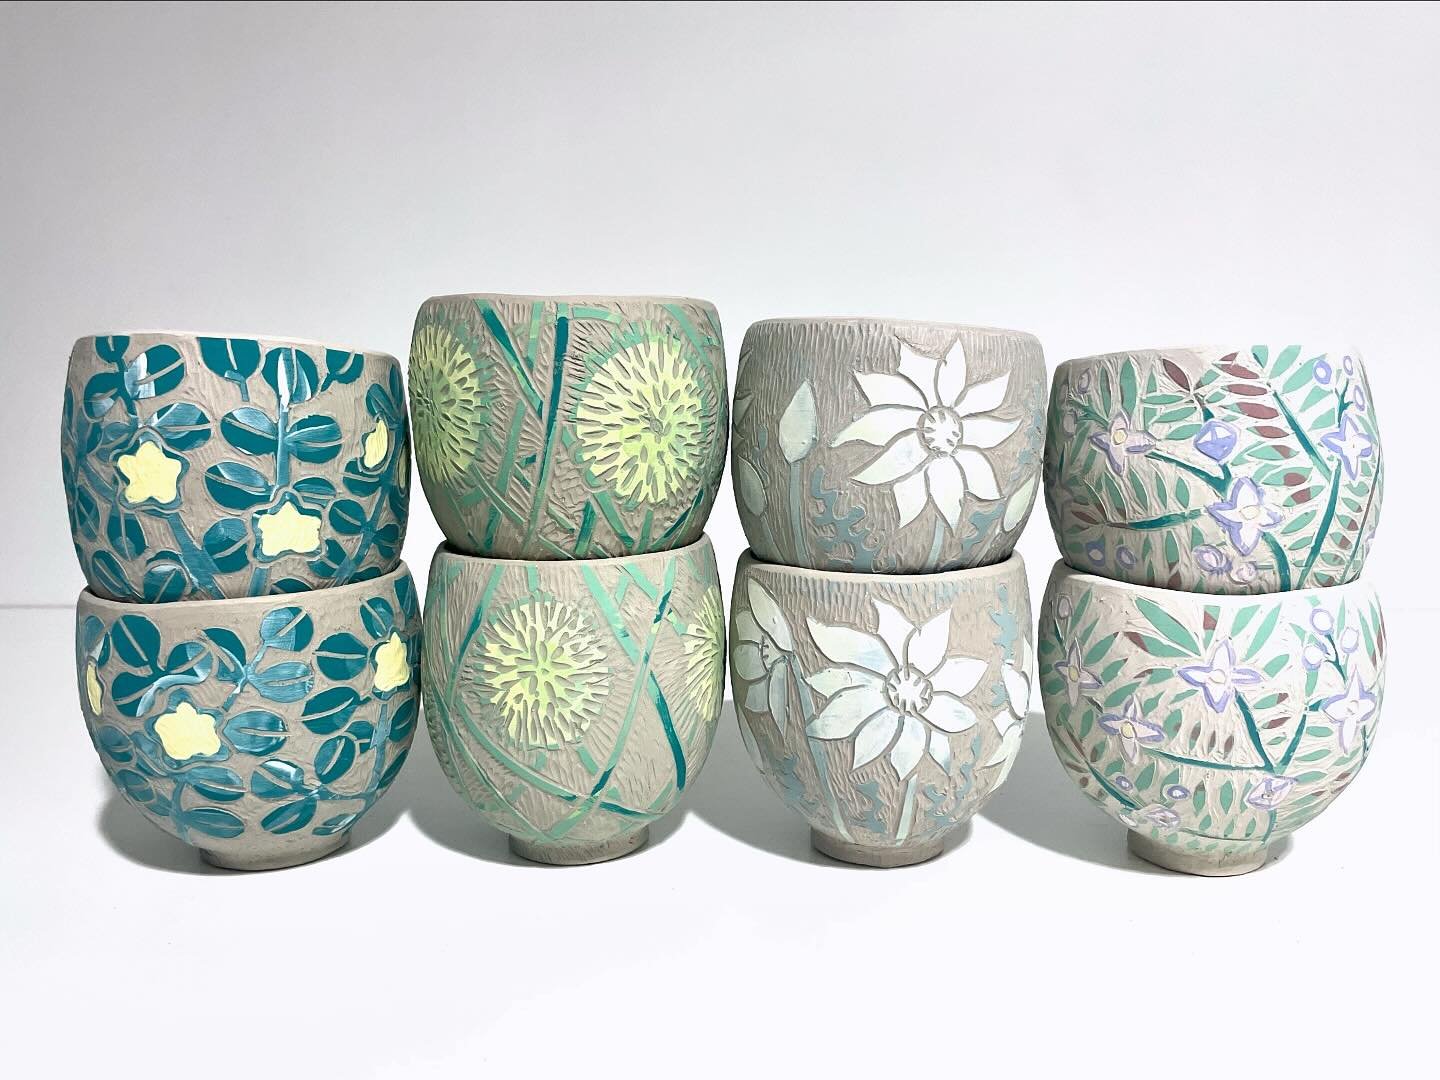 I took a dozen balls of clay, a box of tools and my banding wheel to Gulgong last week, and made cups while watching master demonstrations. (Others knit, I pinch clay 😂) Back in the studio this week, I&rsquo;ve painted and carved the cups, and now t